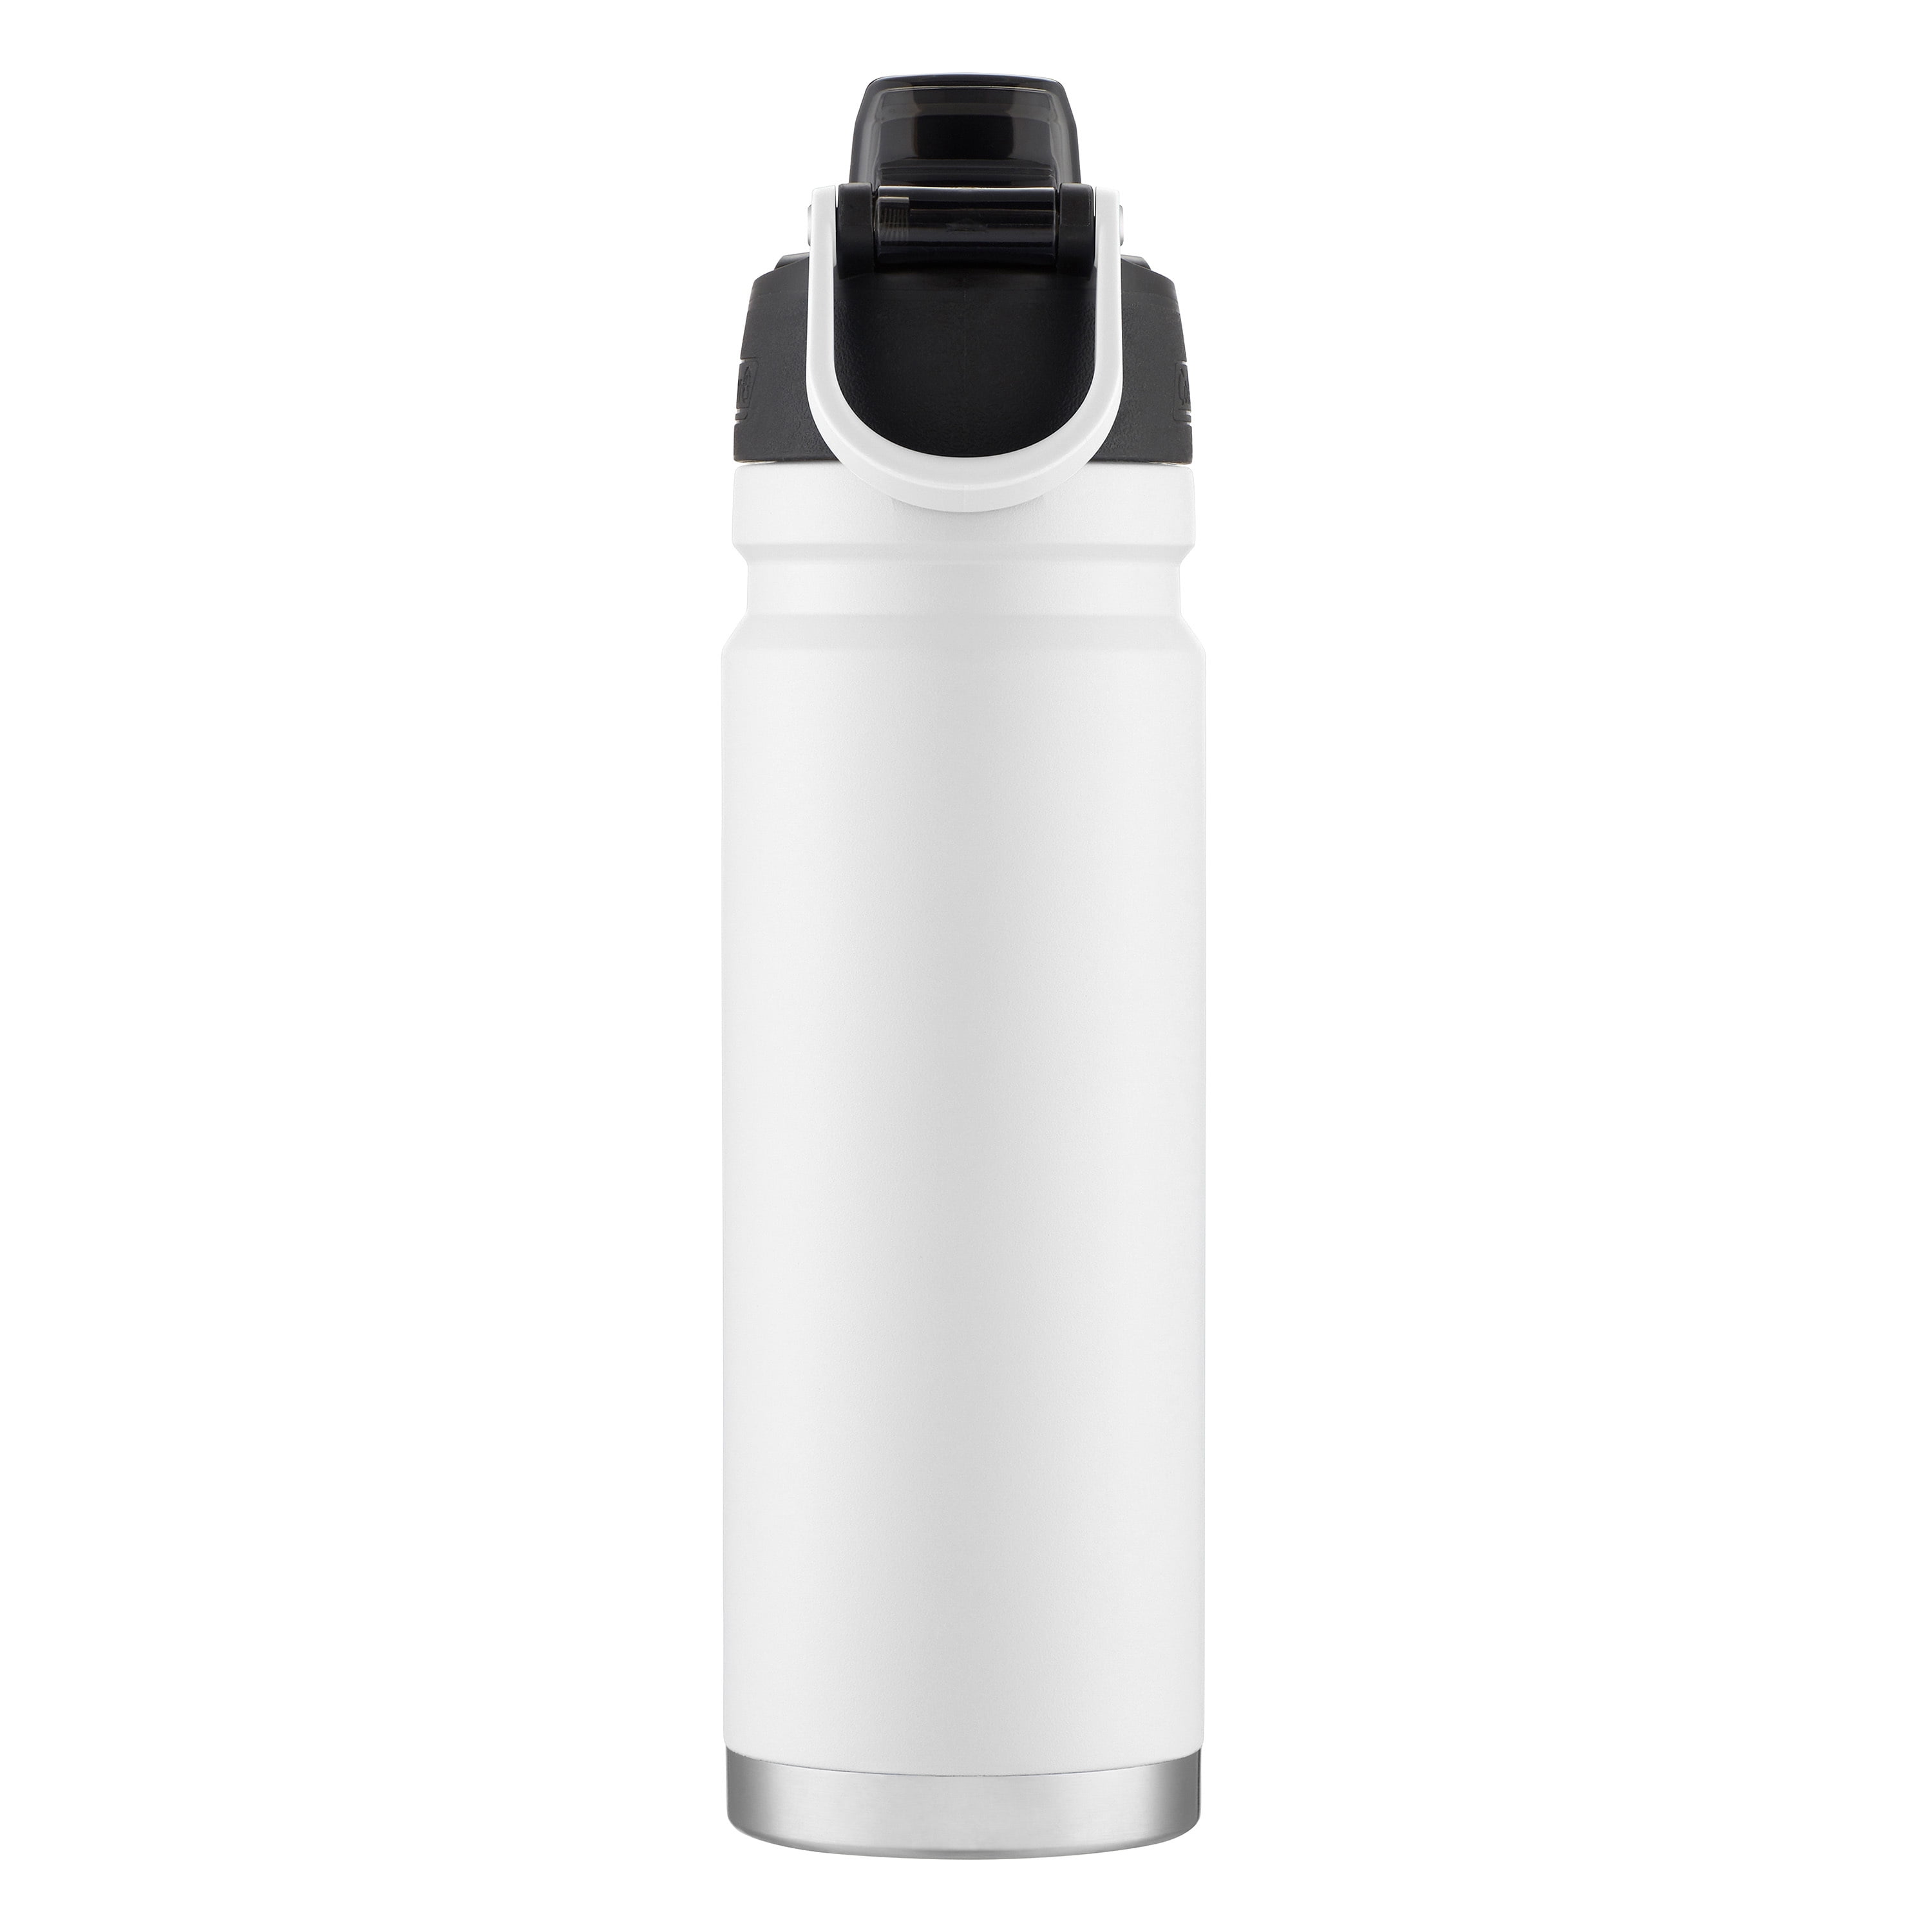 Coleman Burst Vacuum-Insulated Stainless Steel Water Bottle with Leak-Proof  Lid, 24oz/40oz Water Bottle with Carry Handle Keeps Drinks Hot or Cold for